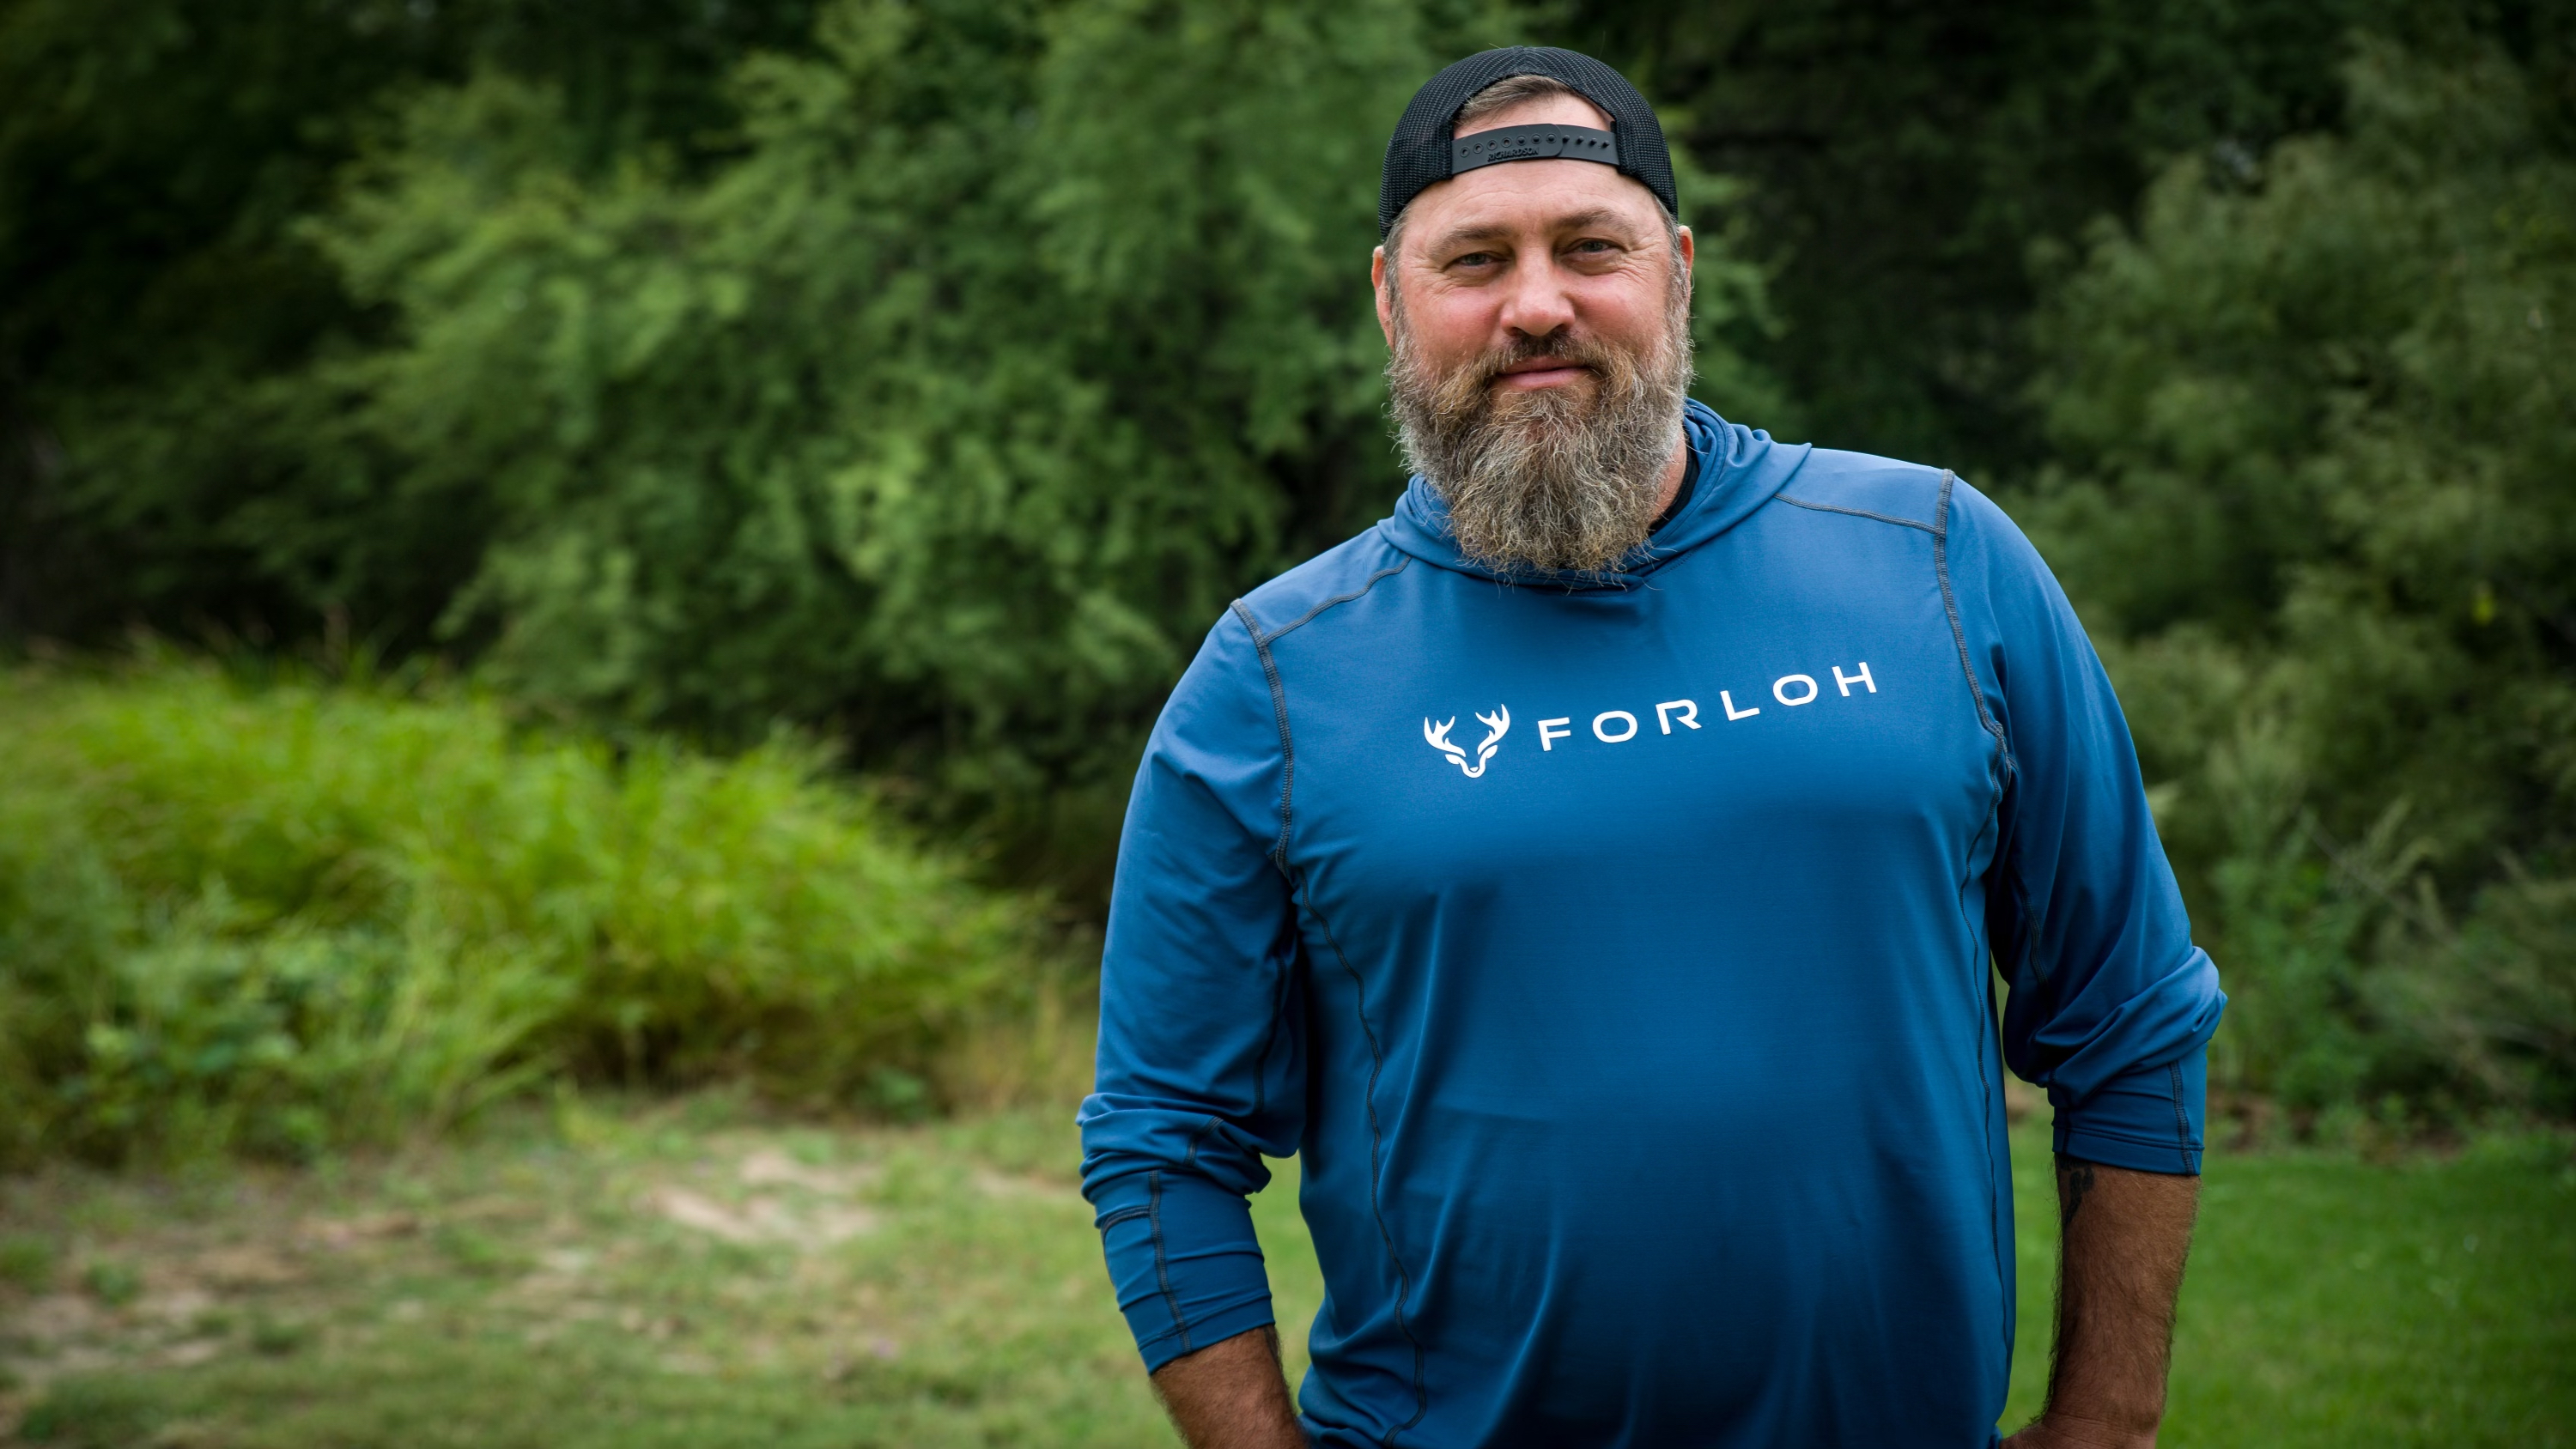 Willie Robertson revealed he never expected "Duck Dynasty" to be such a success, but he's happy it has allowed him to partner with brands like FORLOH to promote their values of faith and family.